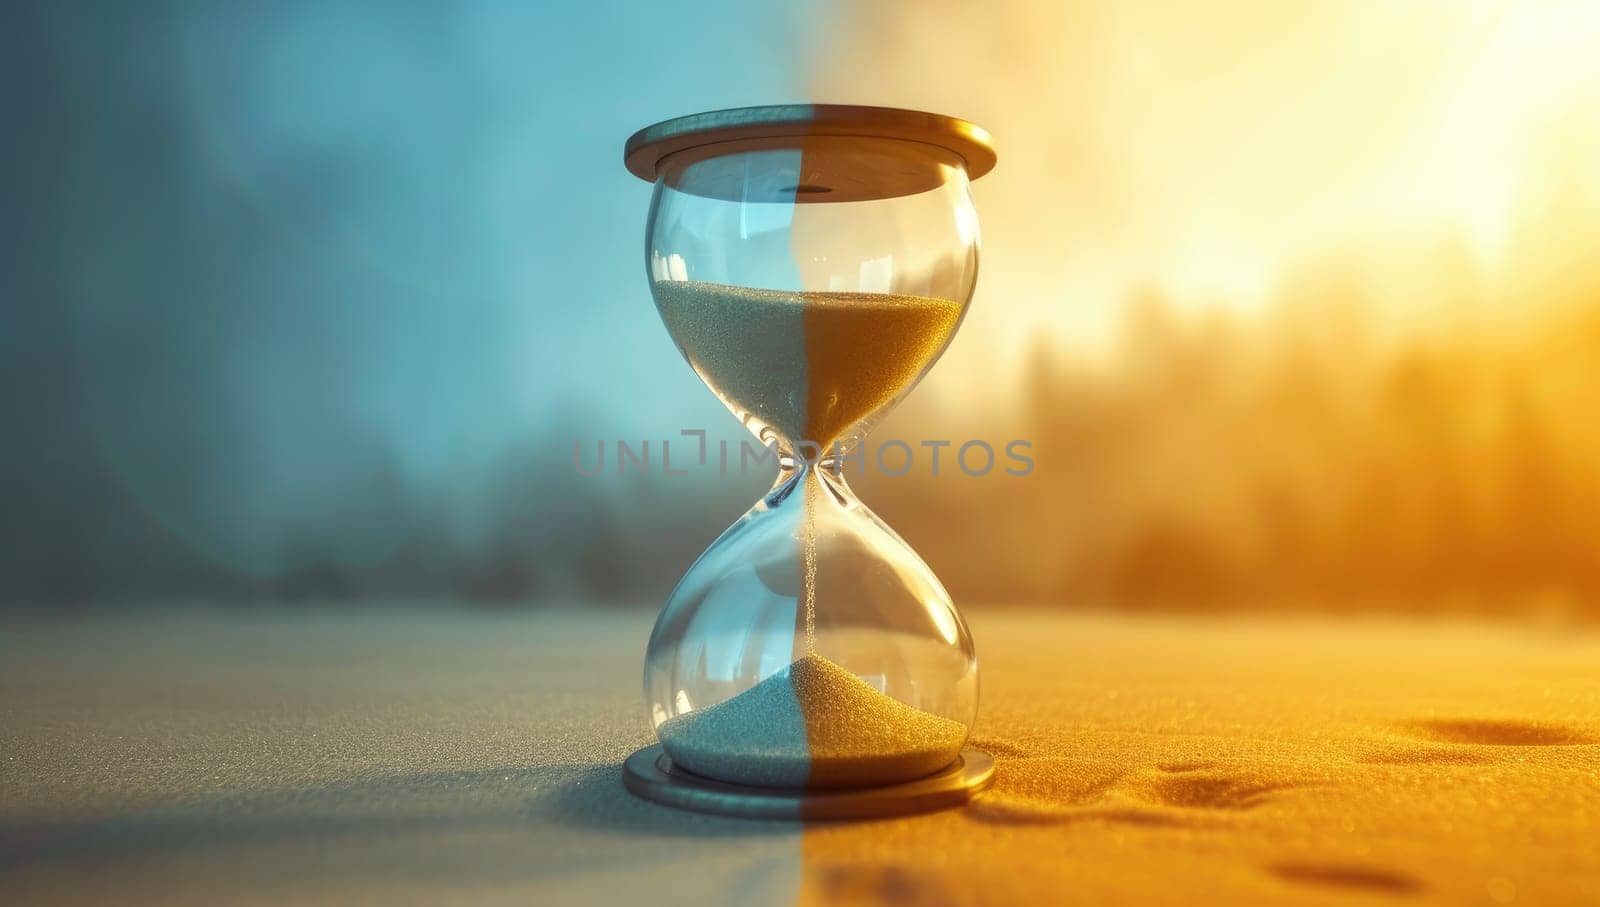 Hourglass in golden sunset light symbolizing the passage of time